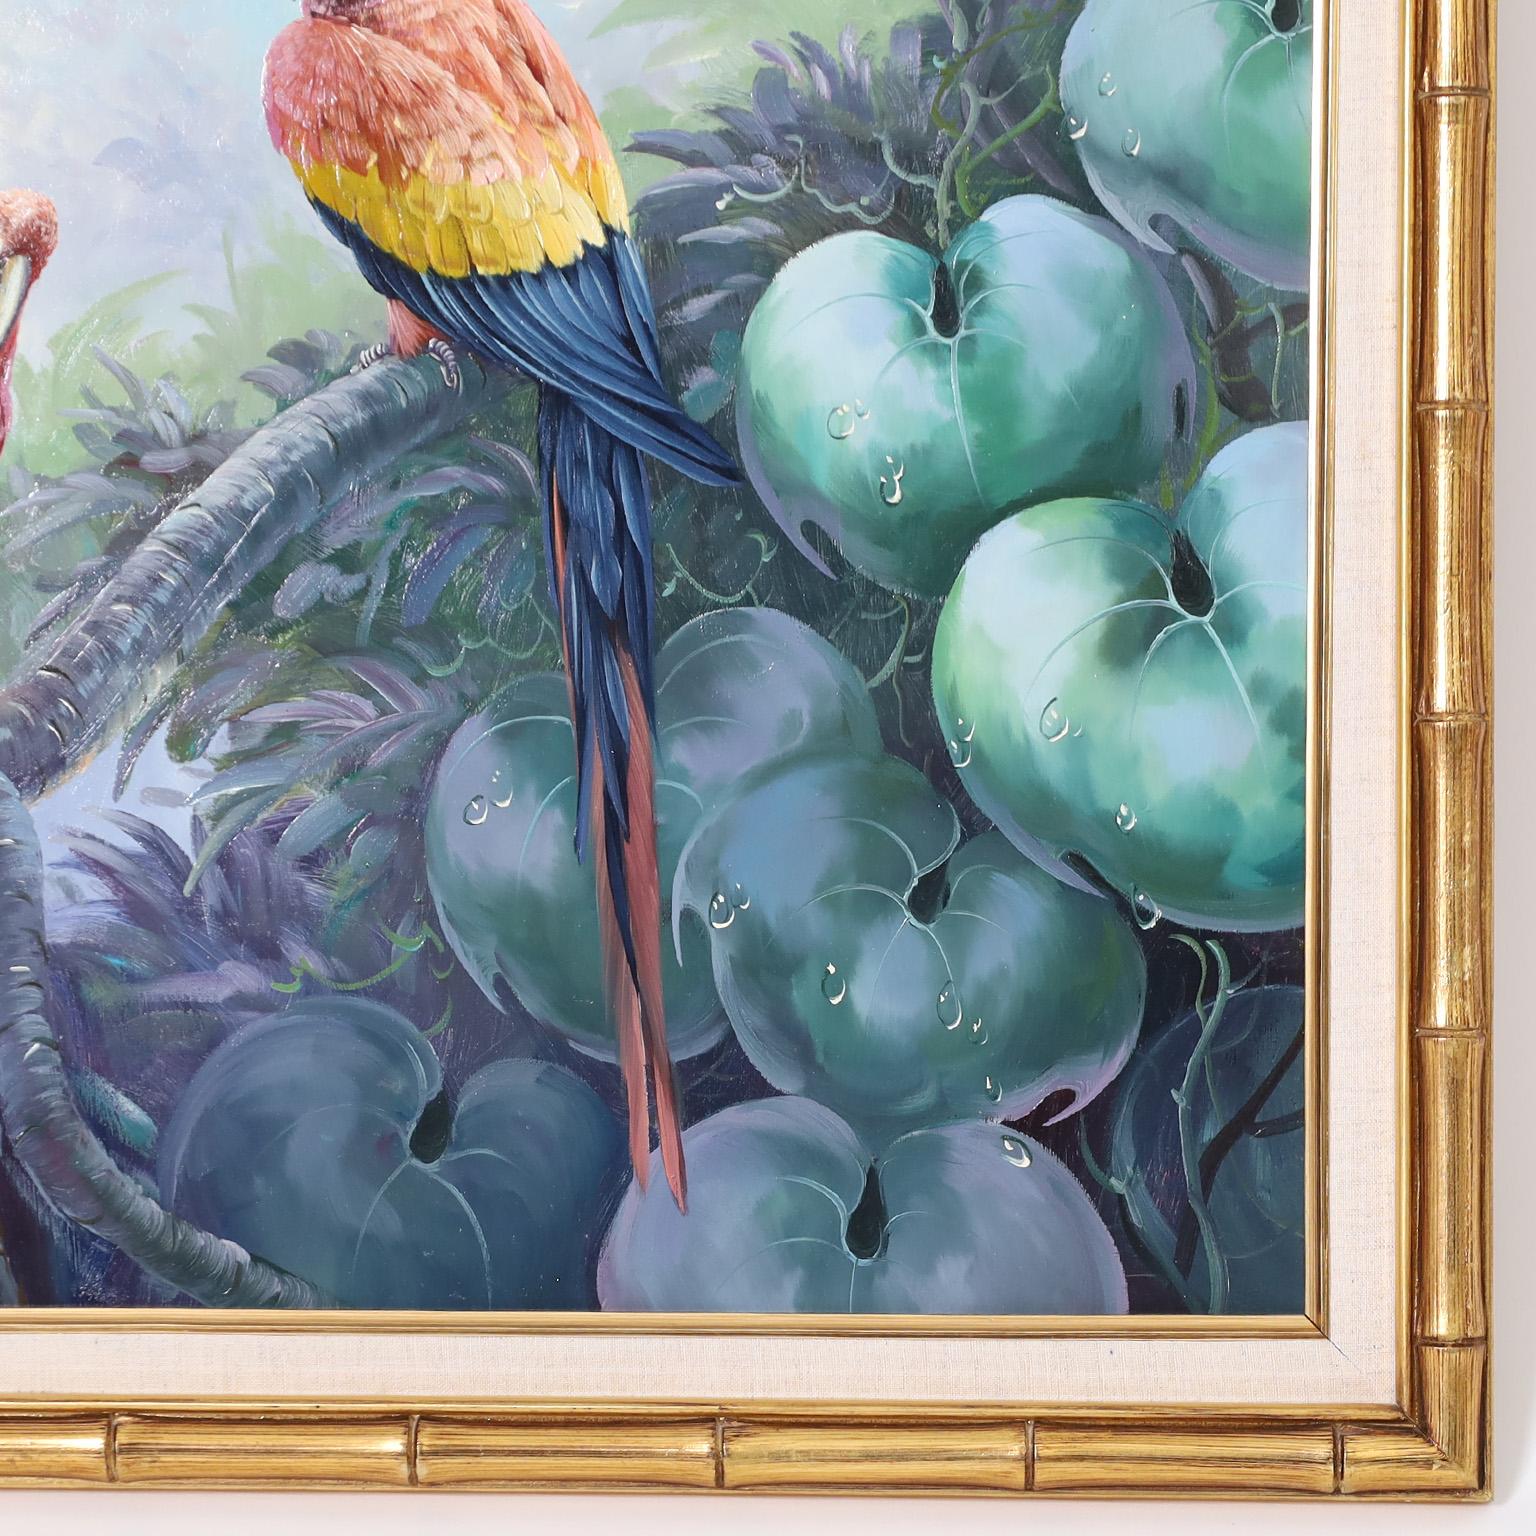 Striking oil painting on canvas of three parrots in a natural rain forest setting executed with hyper realism technique. Signed by noted American artist Andre Lange and presented in a faux bamboo gilt wood frame.